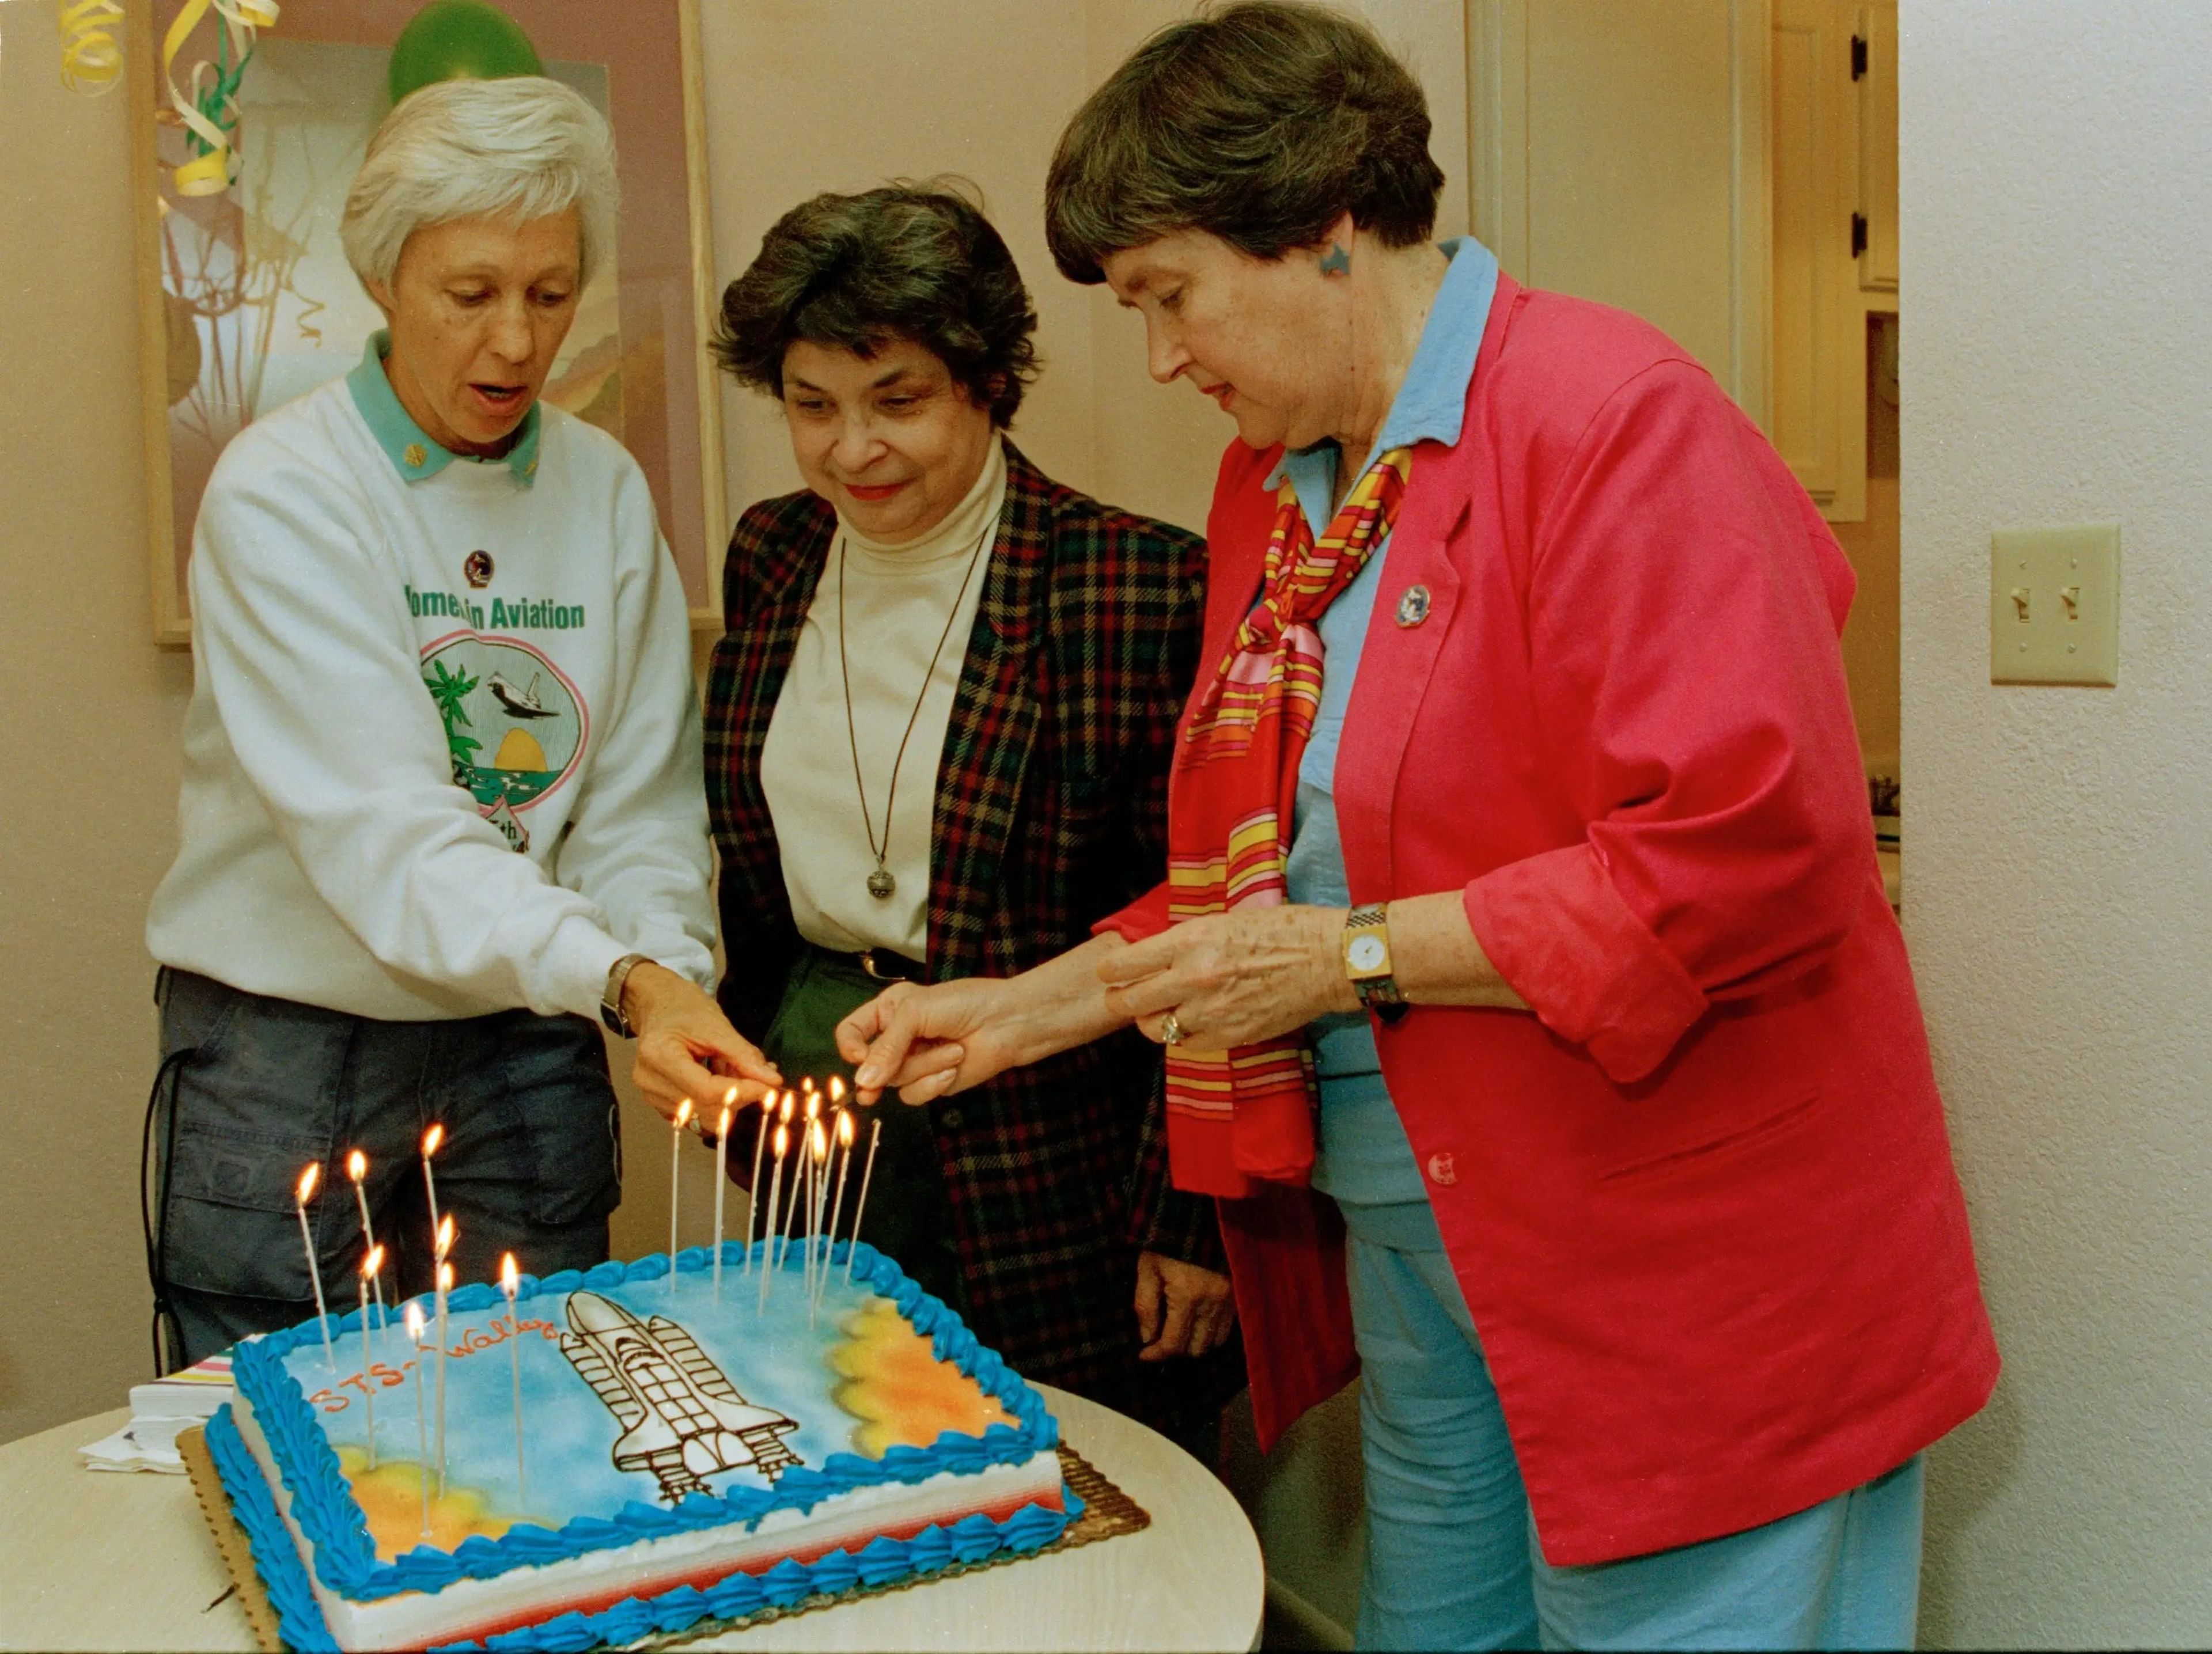 Wally Funk and two other women from Mercury 13 stand over a birthday cake with candles